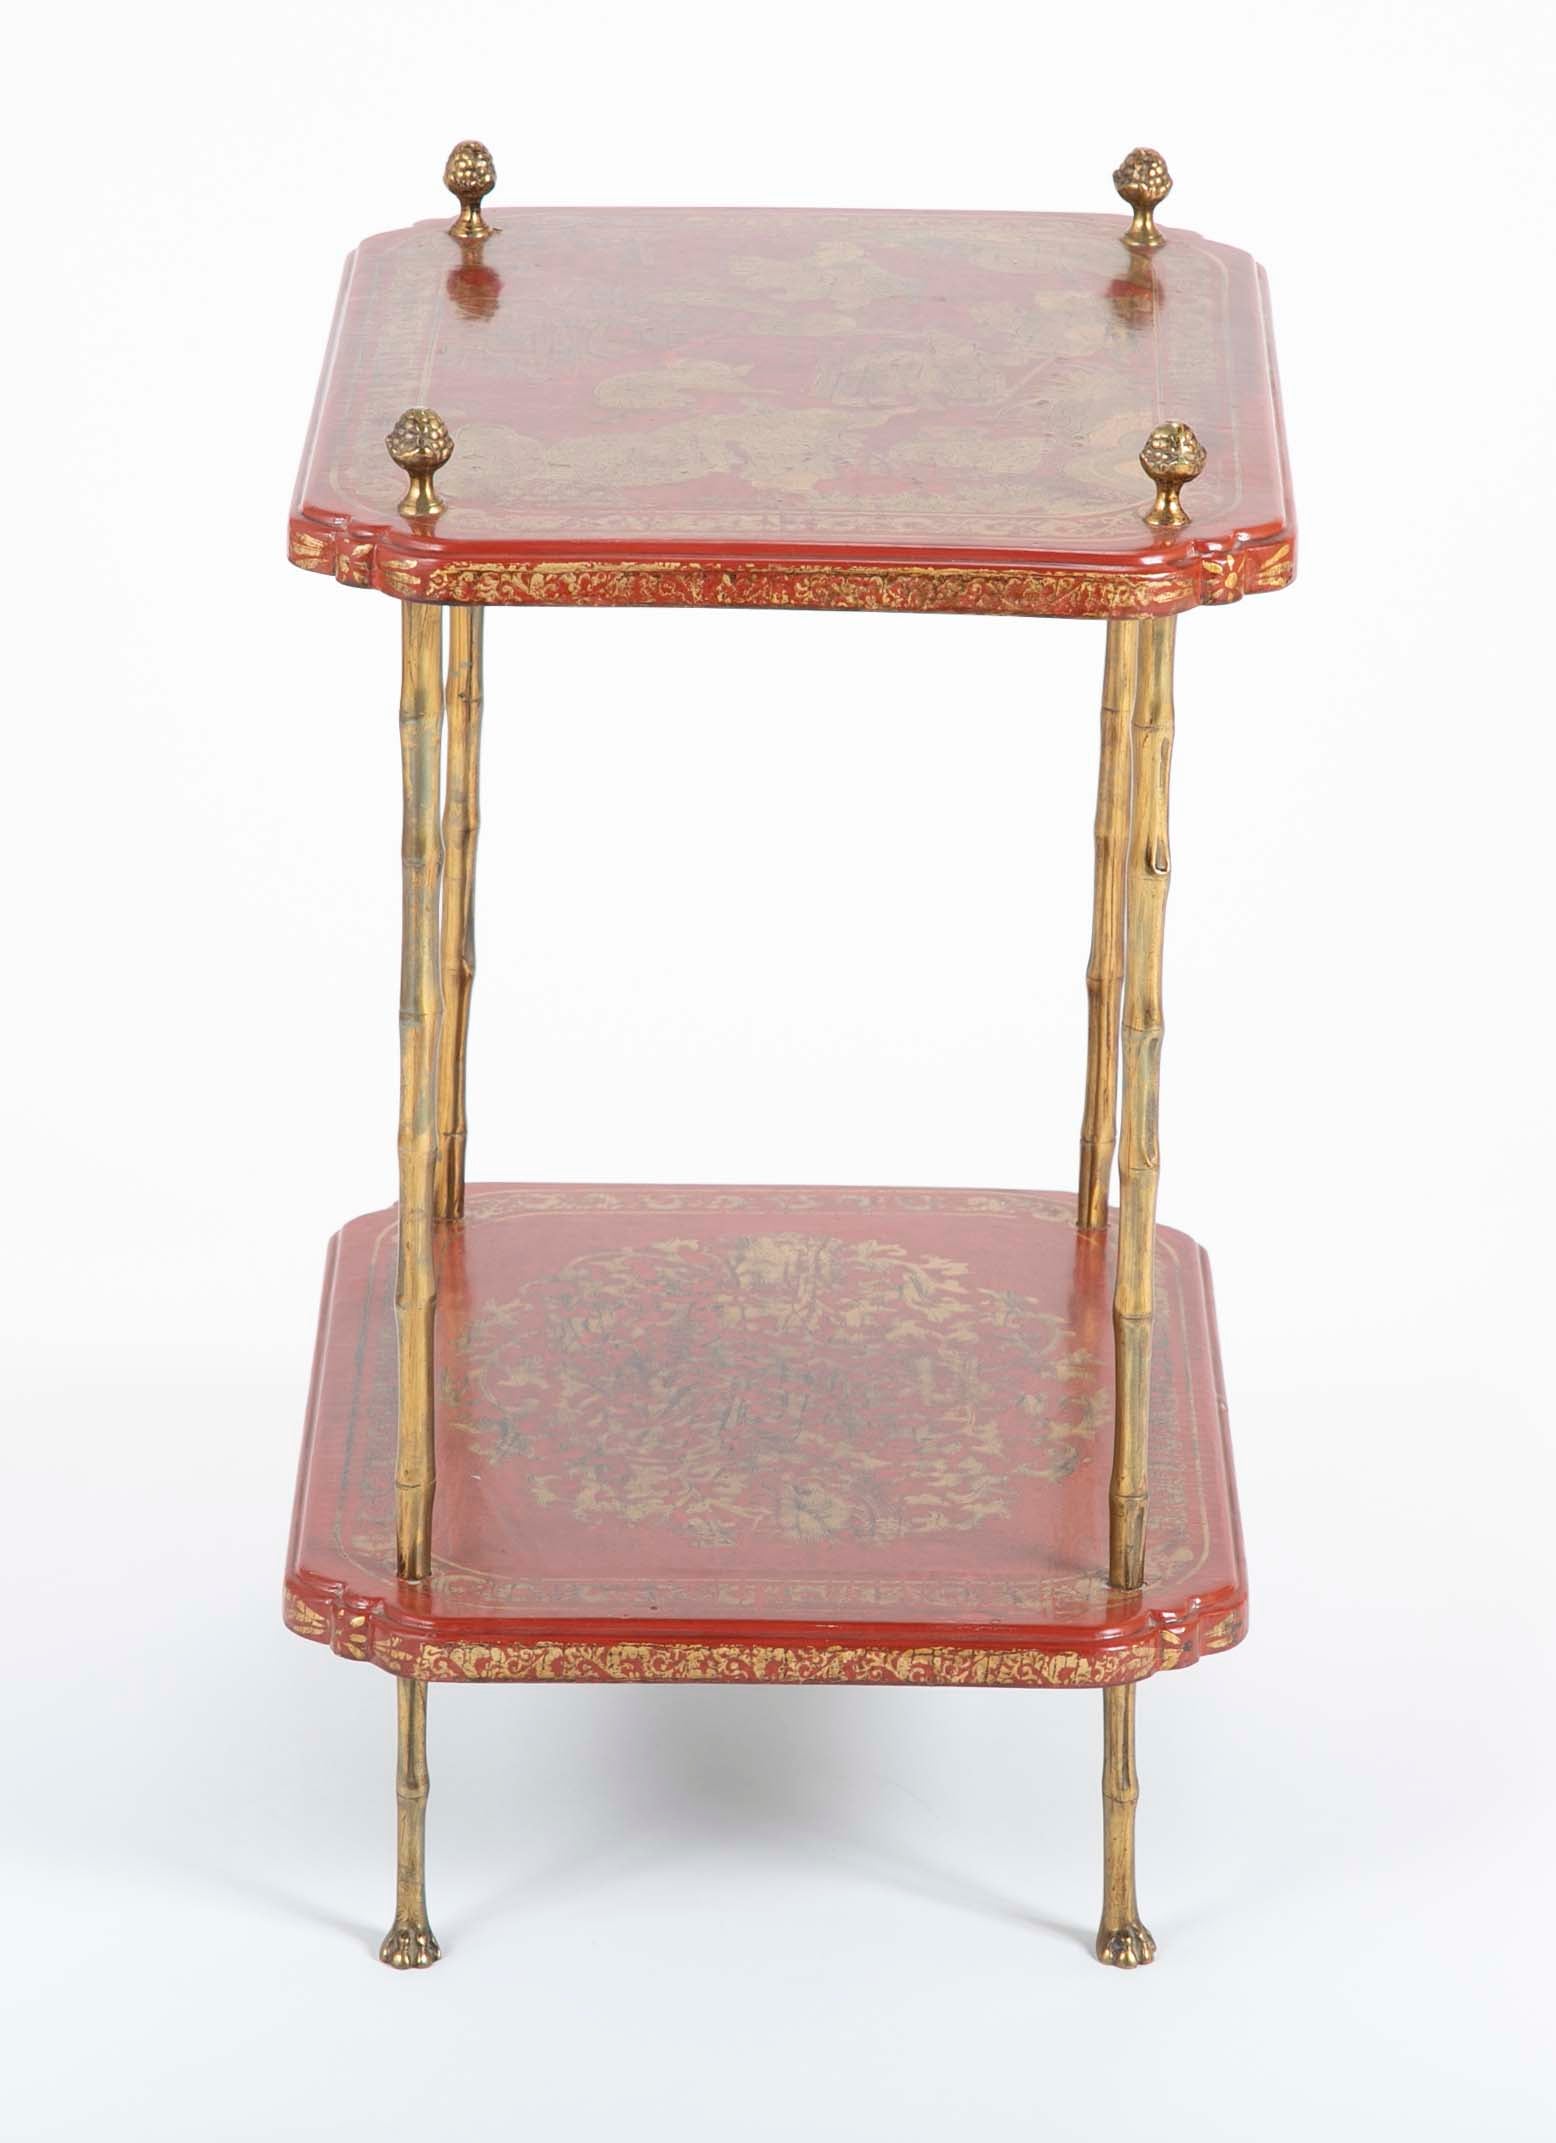 A Pair of French Ormolu Mounted Red & Gilt Japanned Side Tables